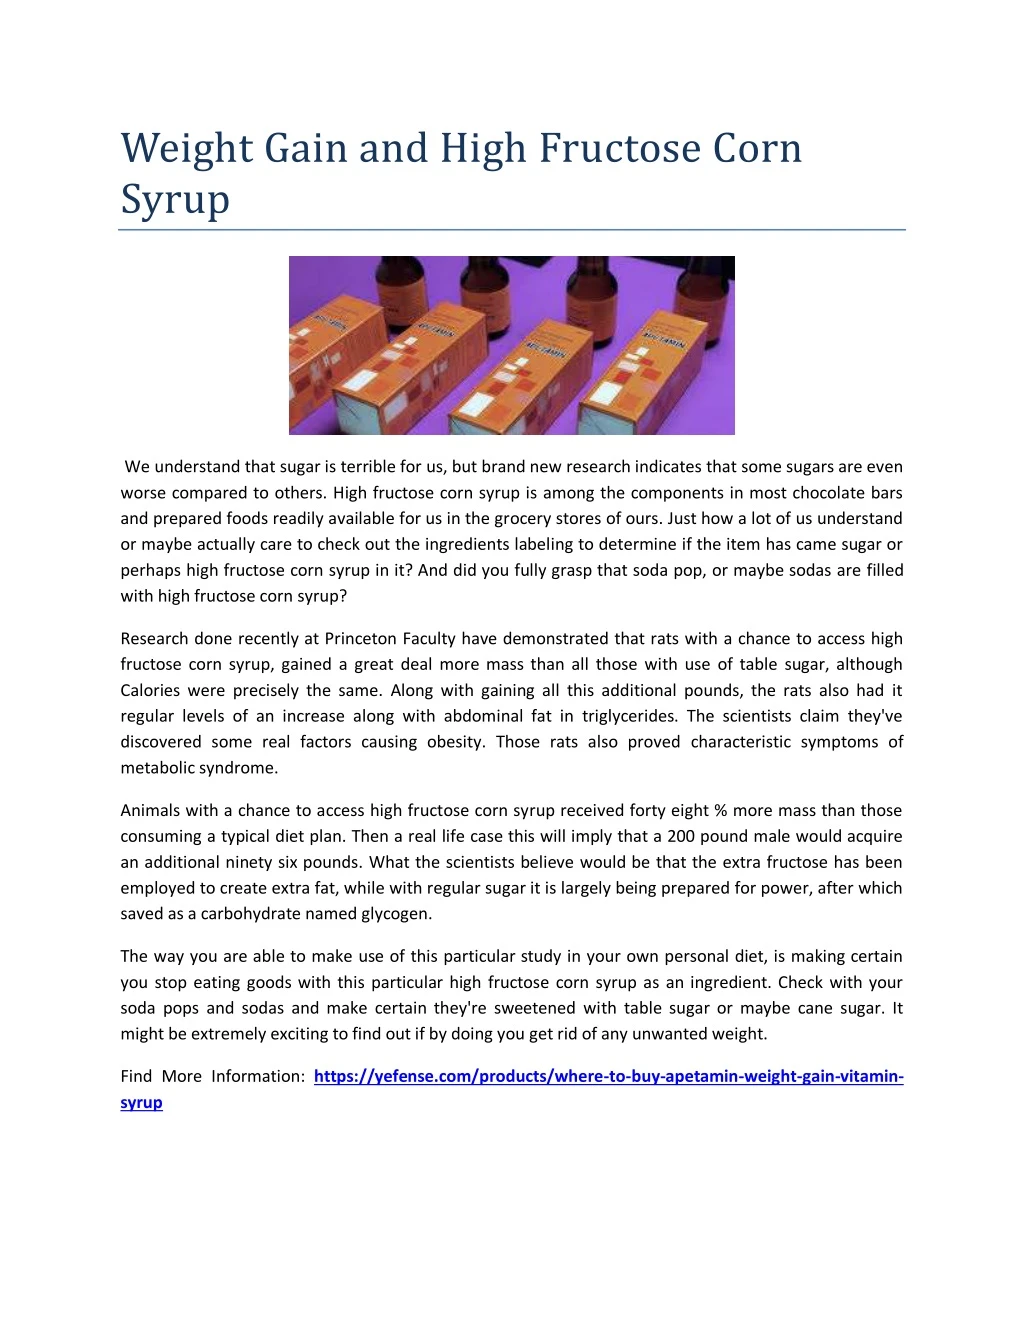 weight gain and high fructose corn syrup